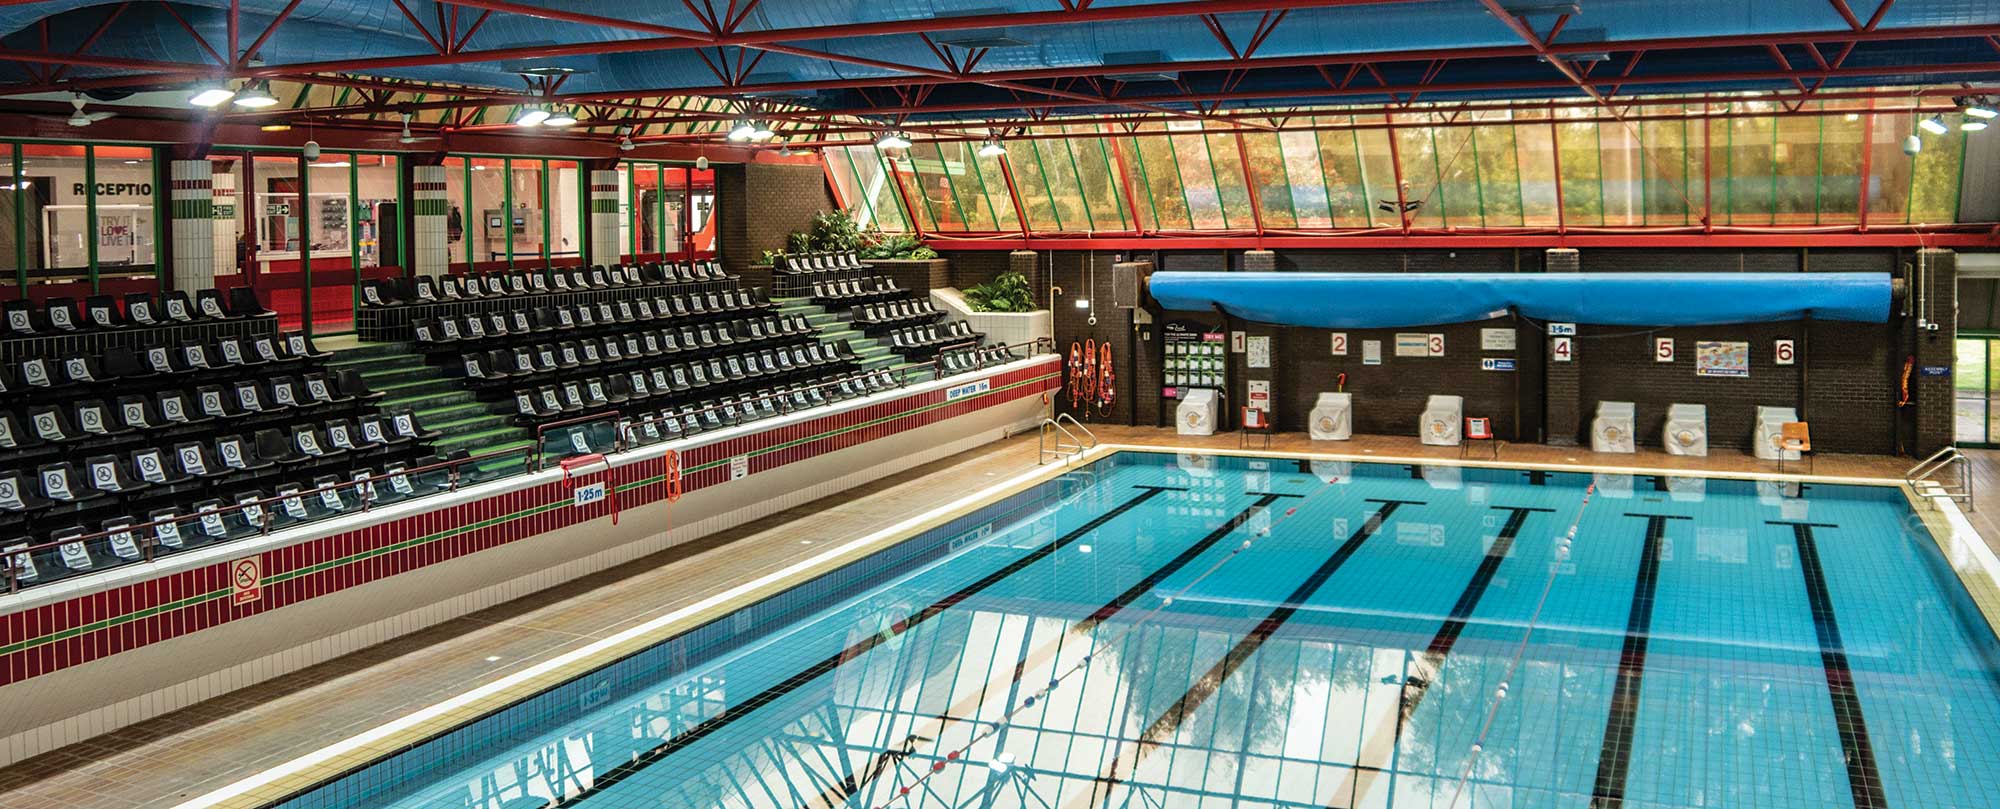 LED Lighting for leisure centres and swimming pools